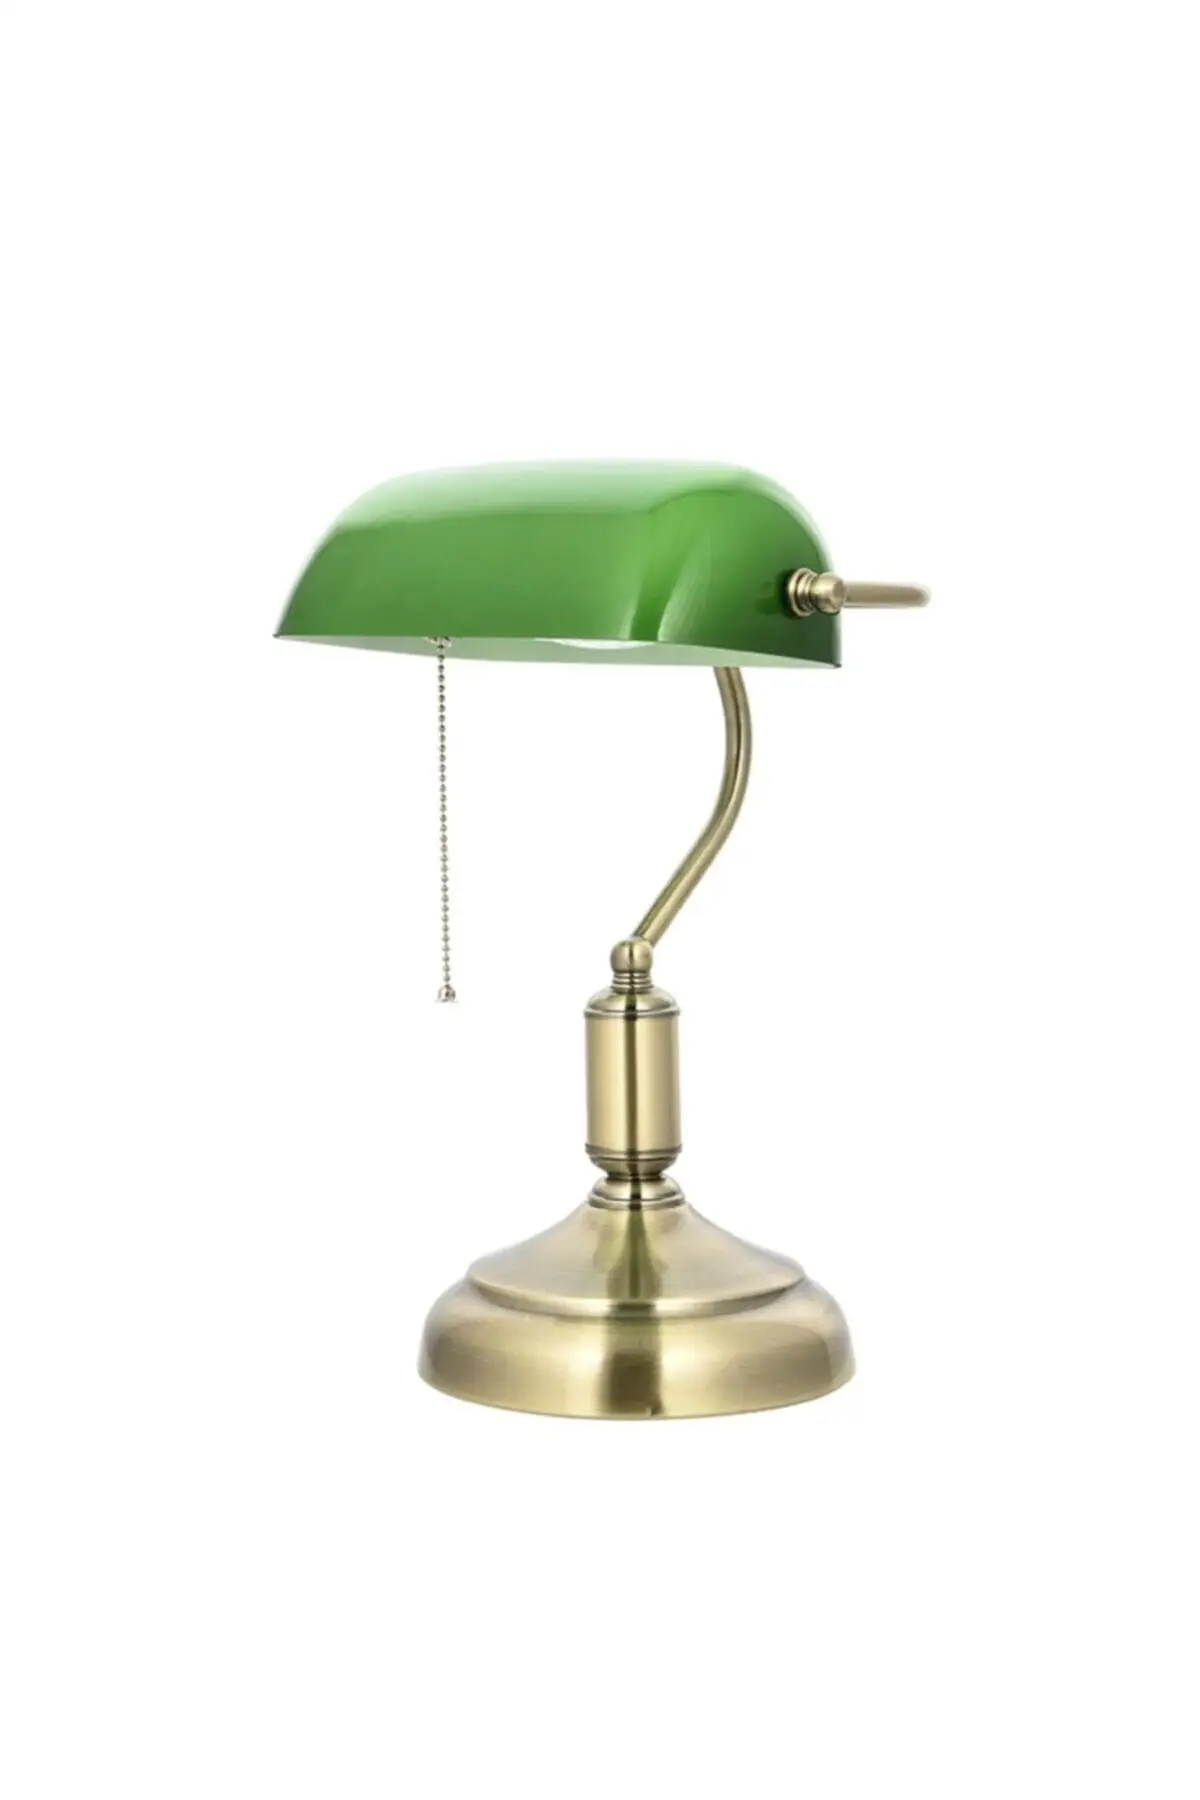 Classical vintage banker lamp table lamp E-27 switch with Green glass lampshade cover desk lights for bedroom study home reading